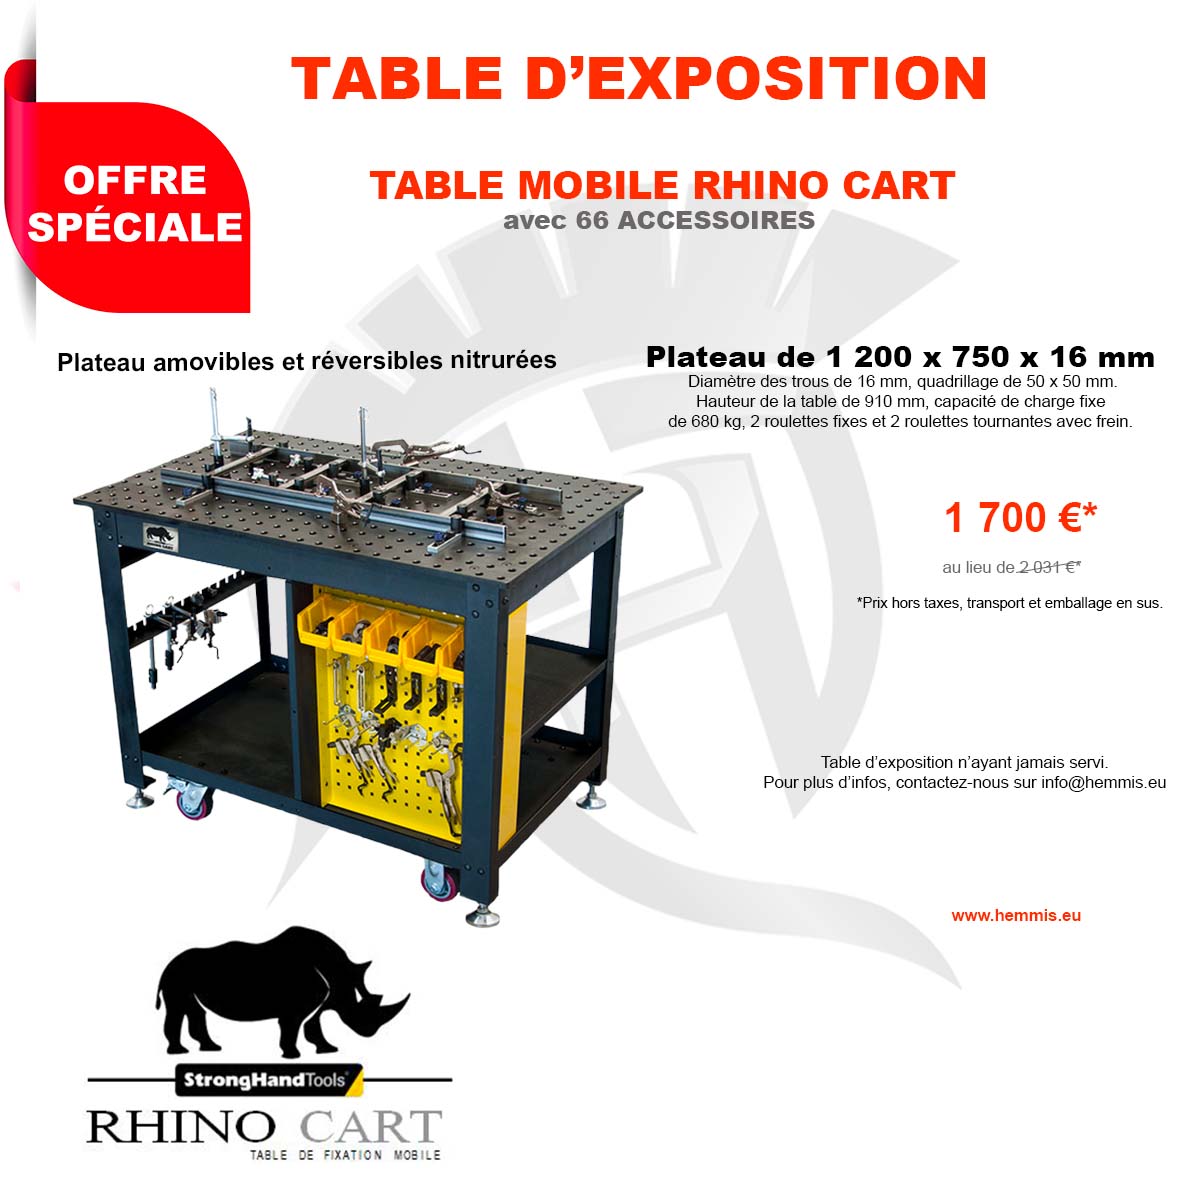 offre spéciale table d'exposition rhino cart